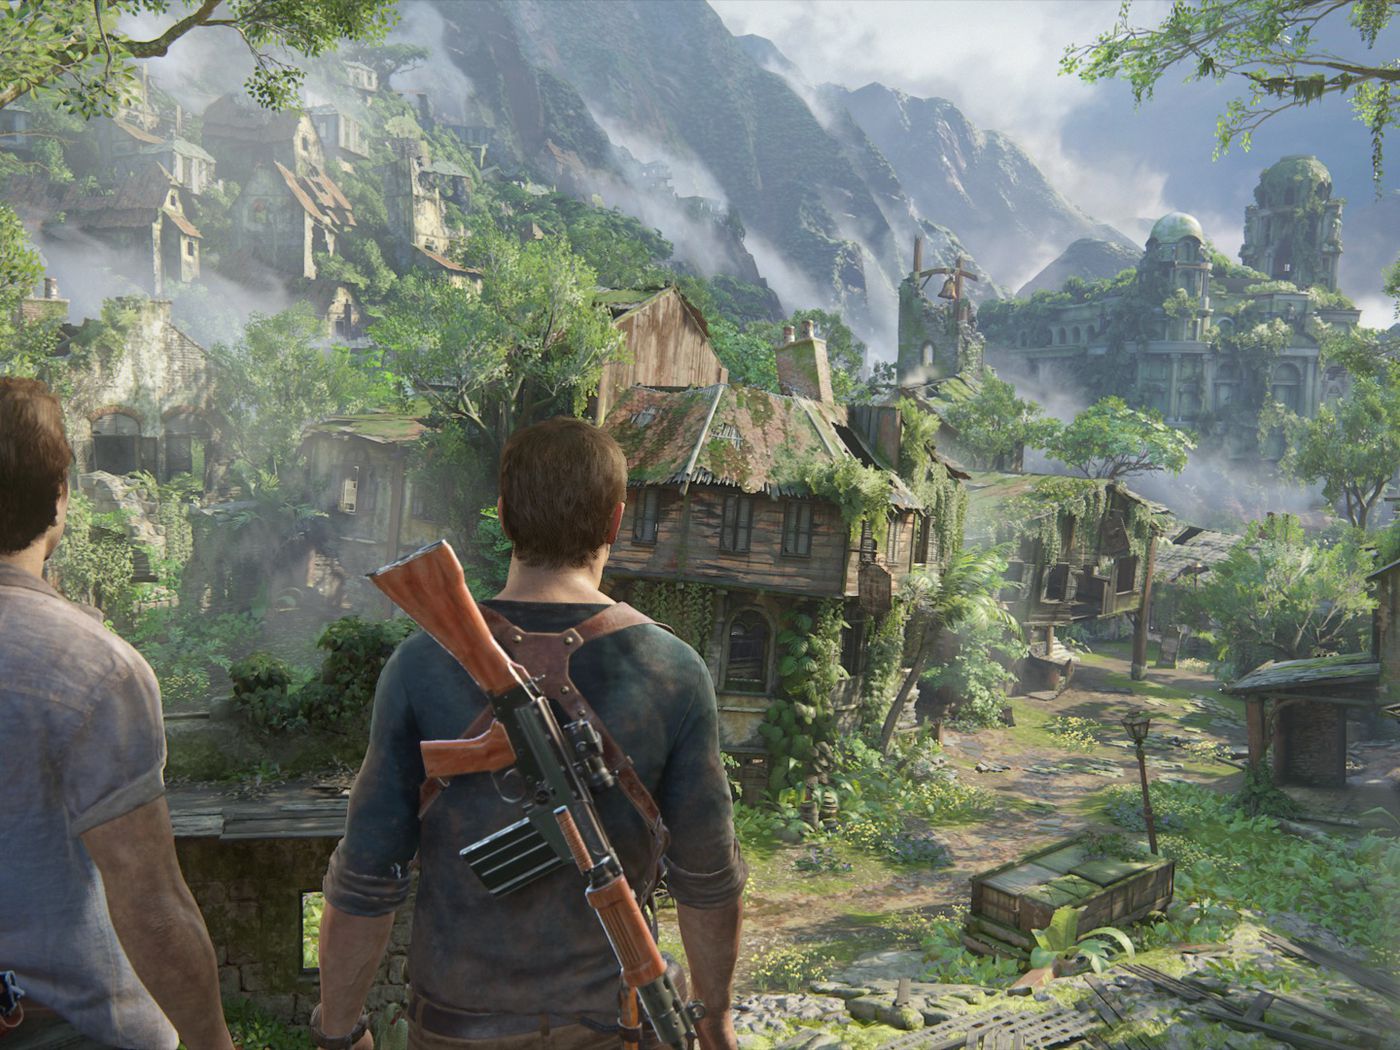 Uncharted 4 PC Latest Version Free Download